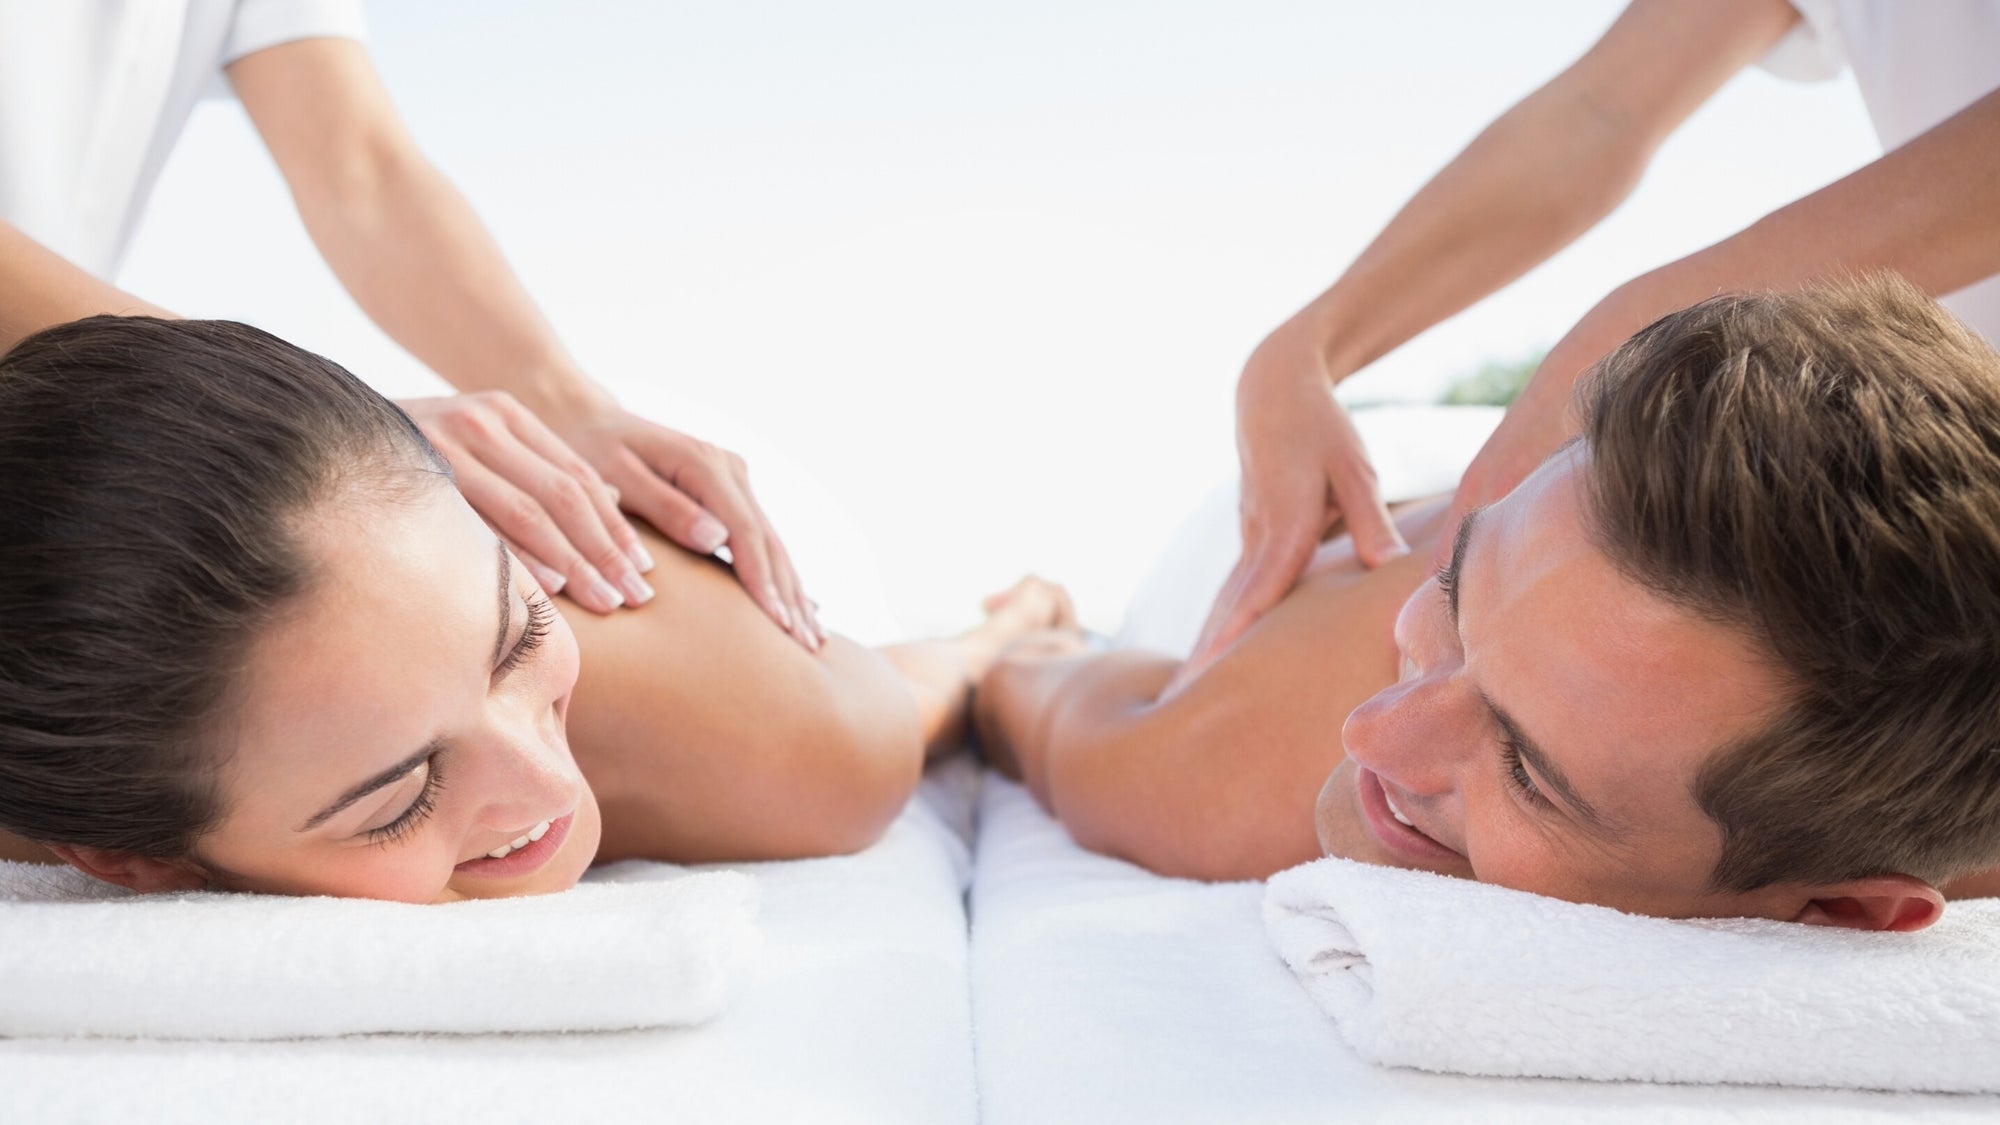 Using Massage to Strengthen Your Relationship